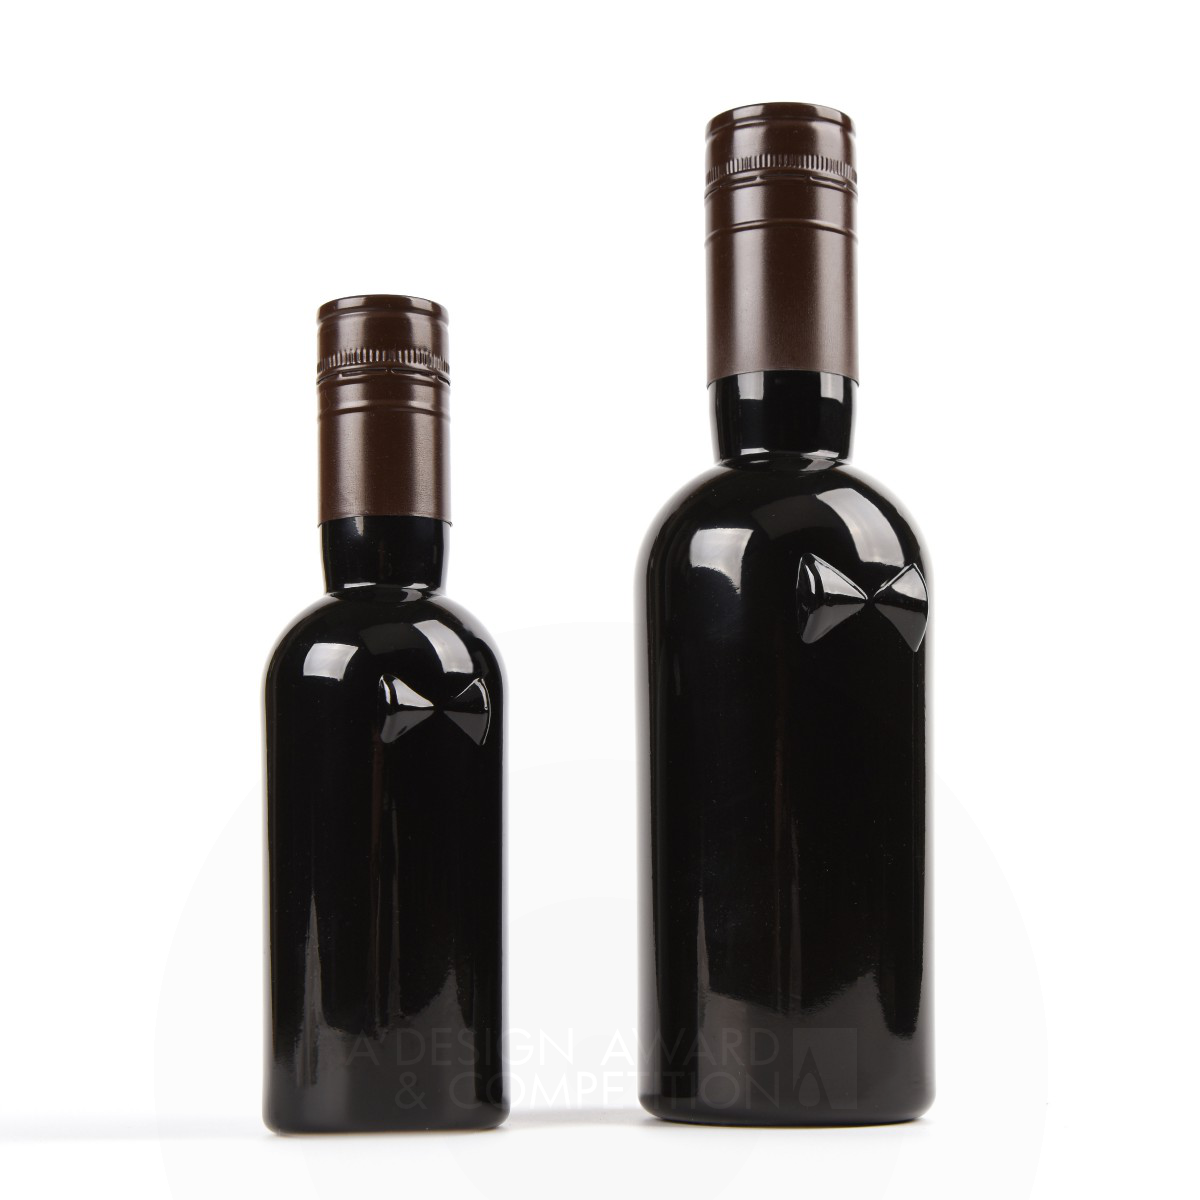 X-SIR wine bottle,can be laid flatwise by Zhang Jian